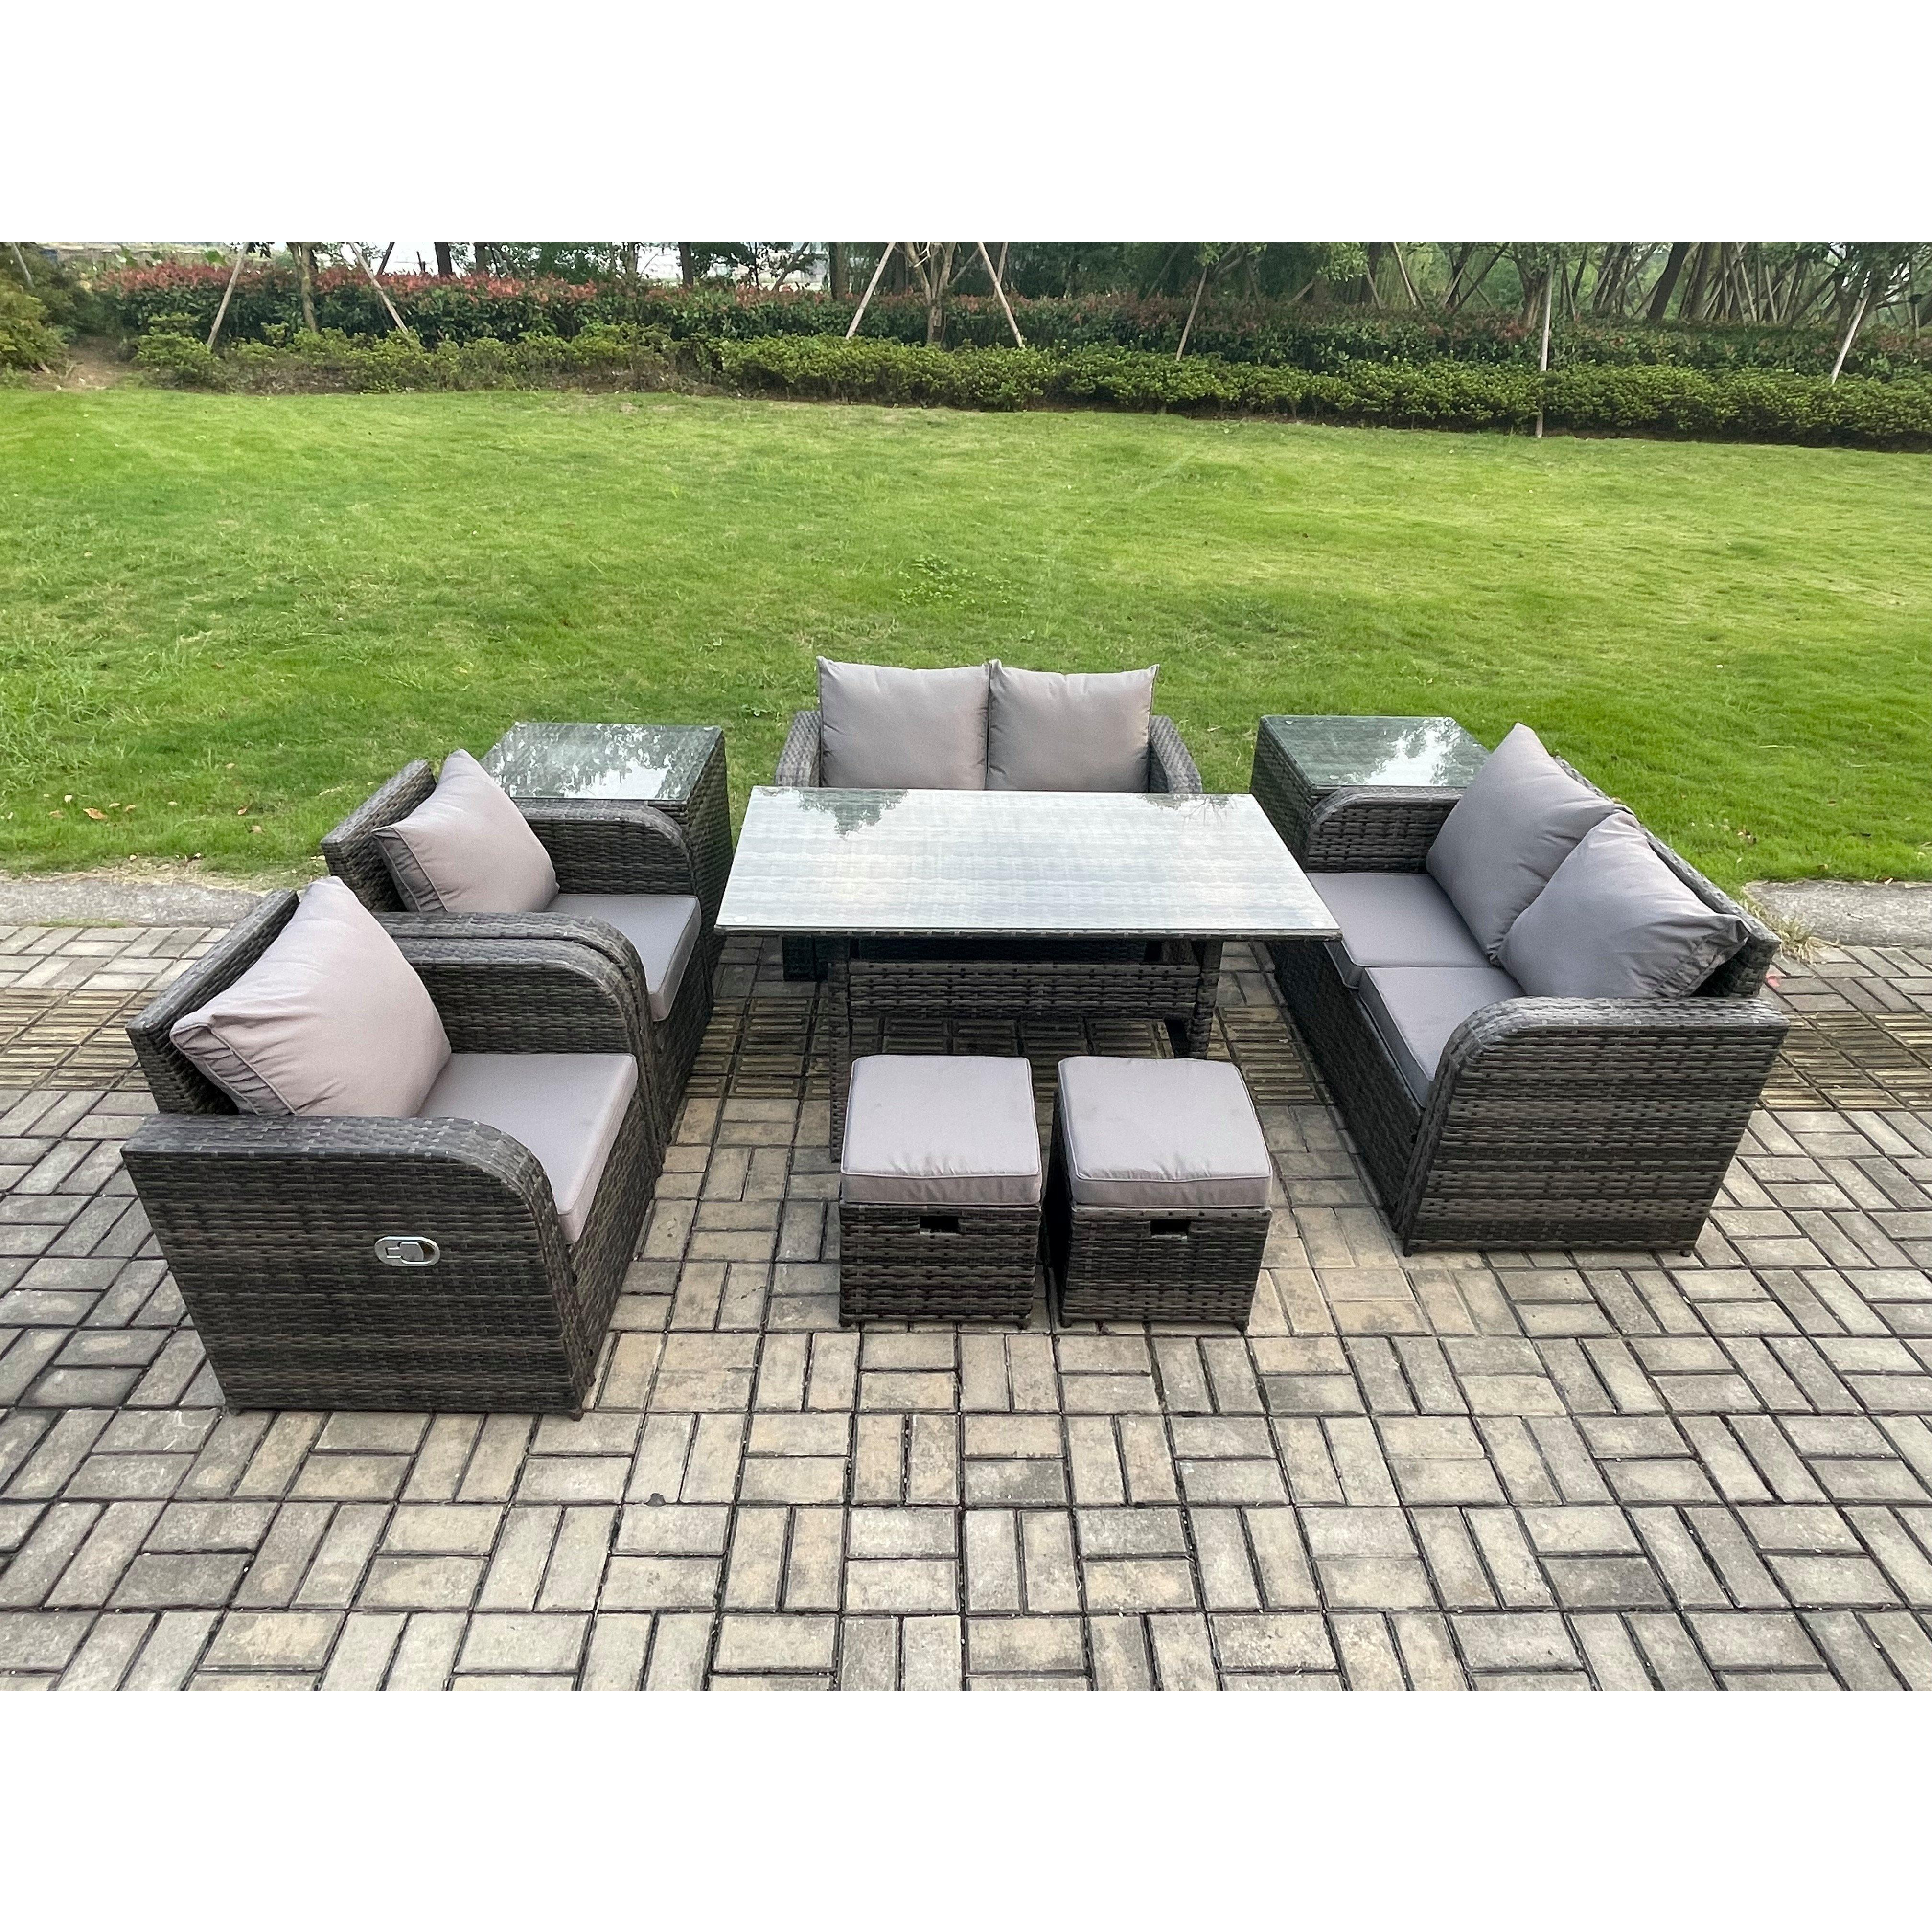 Outdoor Rattan Garden Furniture 9 piece Grey Patio Furniture Set 8 Seater Lounge Sofa Set with Reclining Chairs - image 1